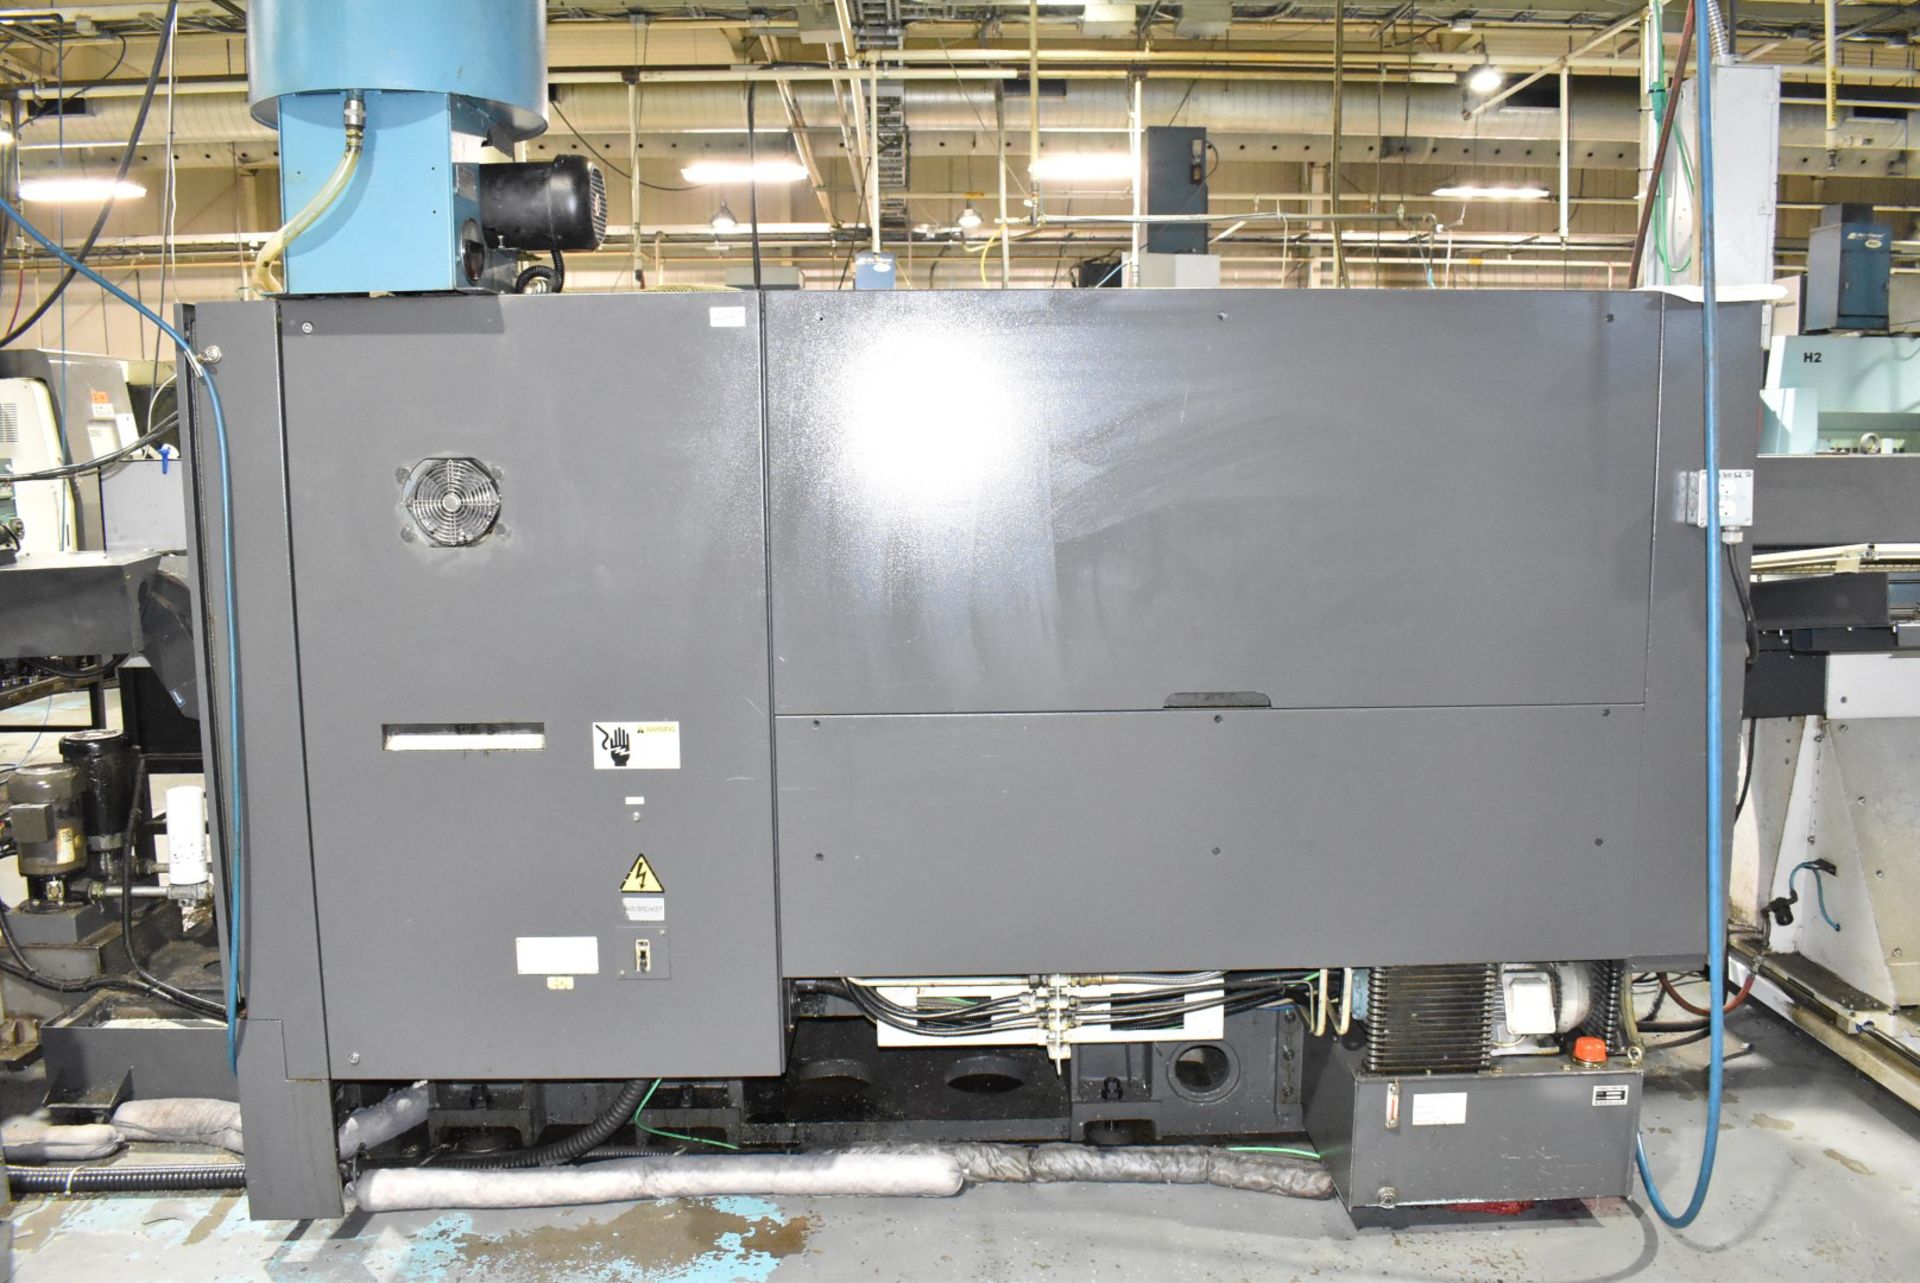 NAKAMURA-TOME (2006) WT-150 MMYS MULTI-AXIS OPPOSED SPINDLE AND TWIN TURRET CNC MULTI-TASKING CENTER - Image 12 of 15